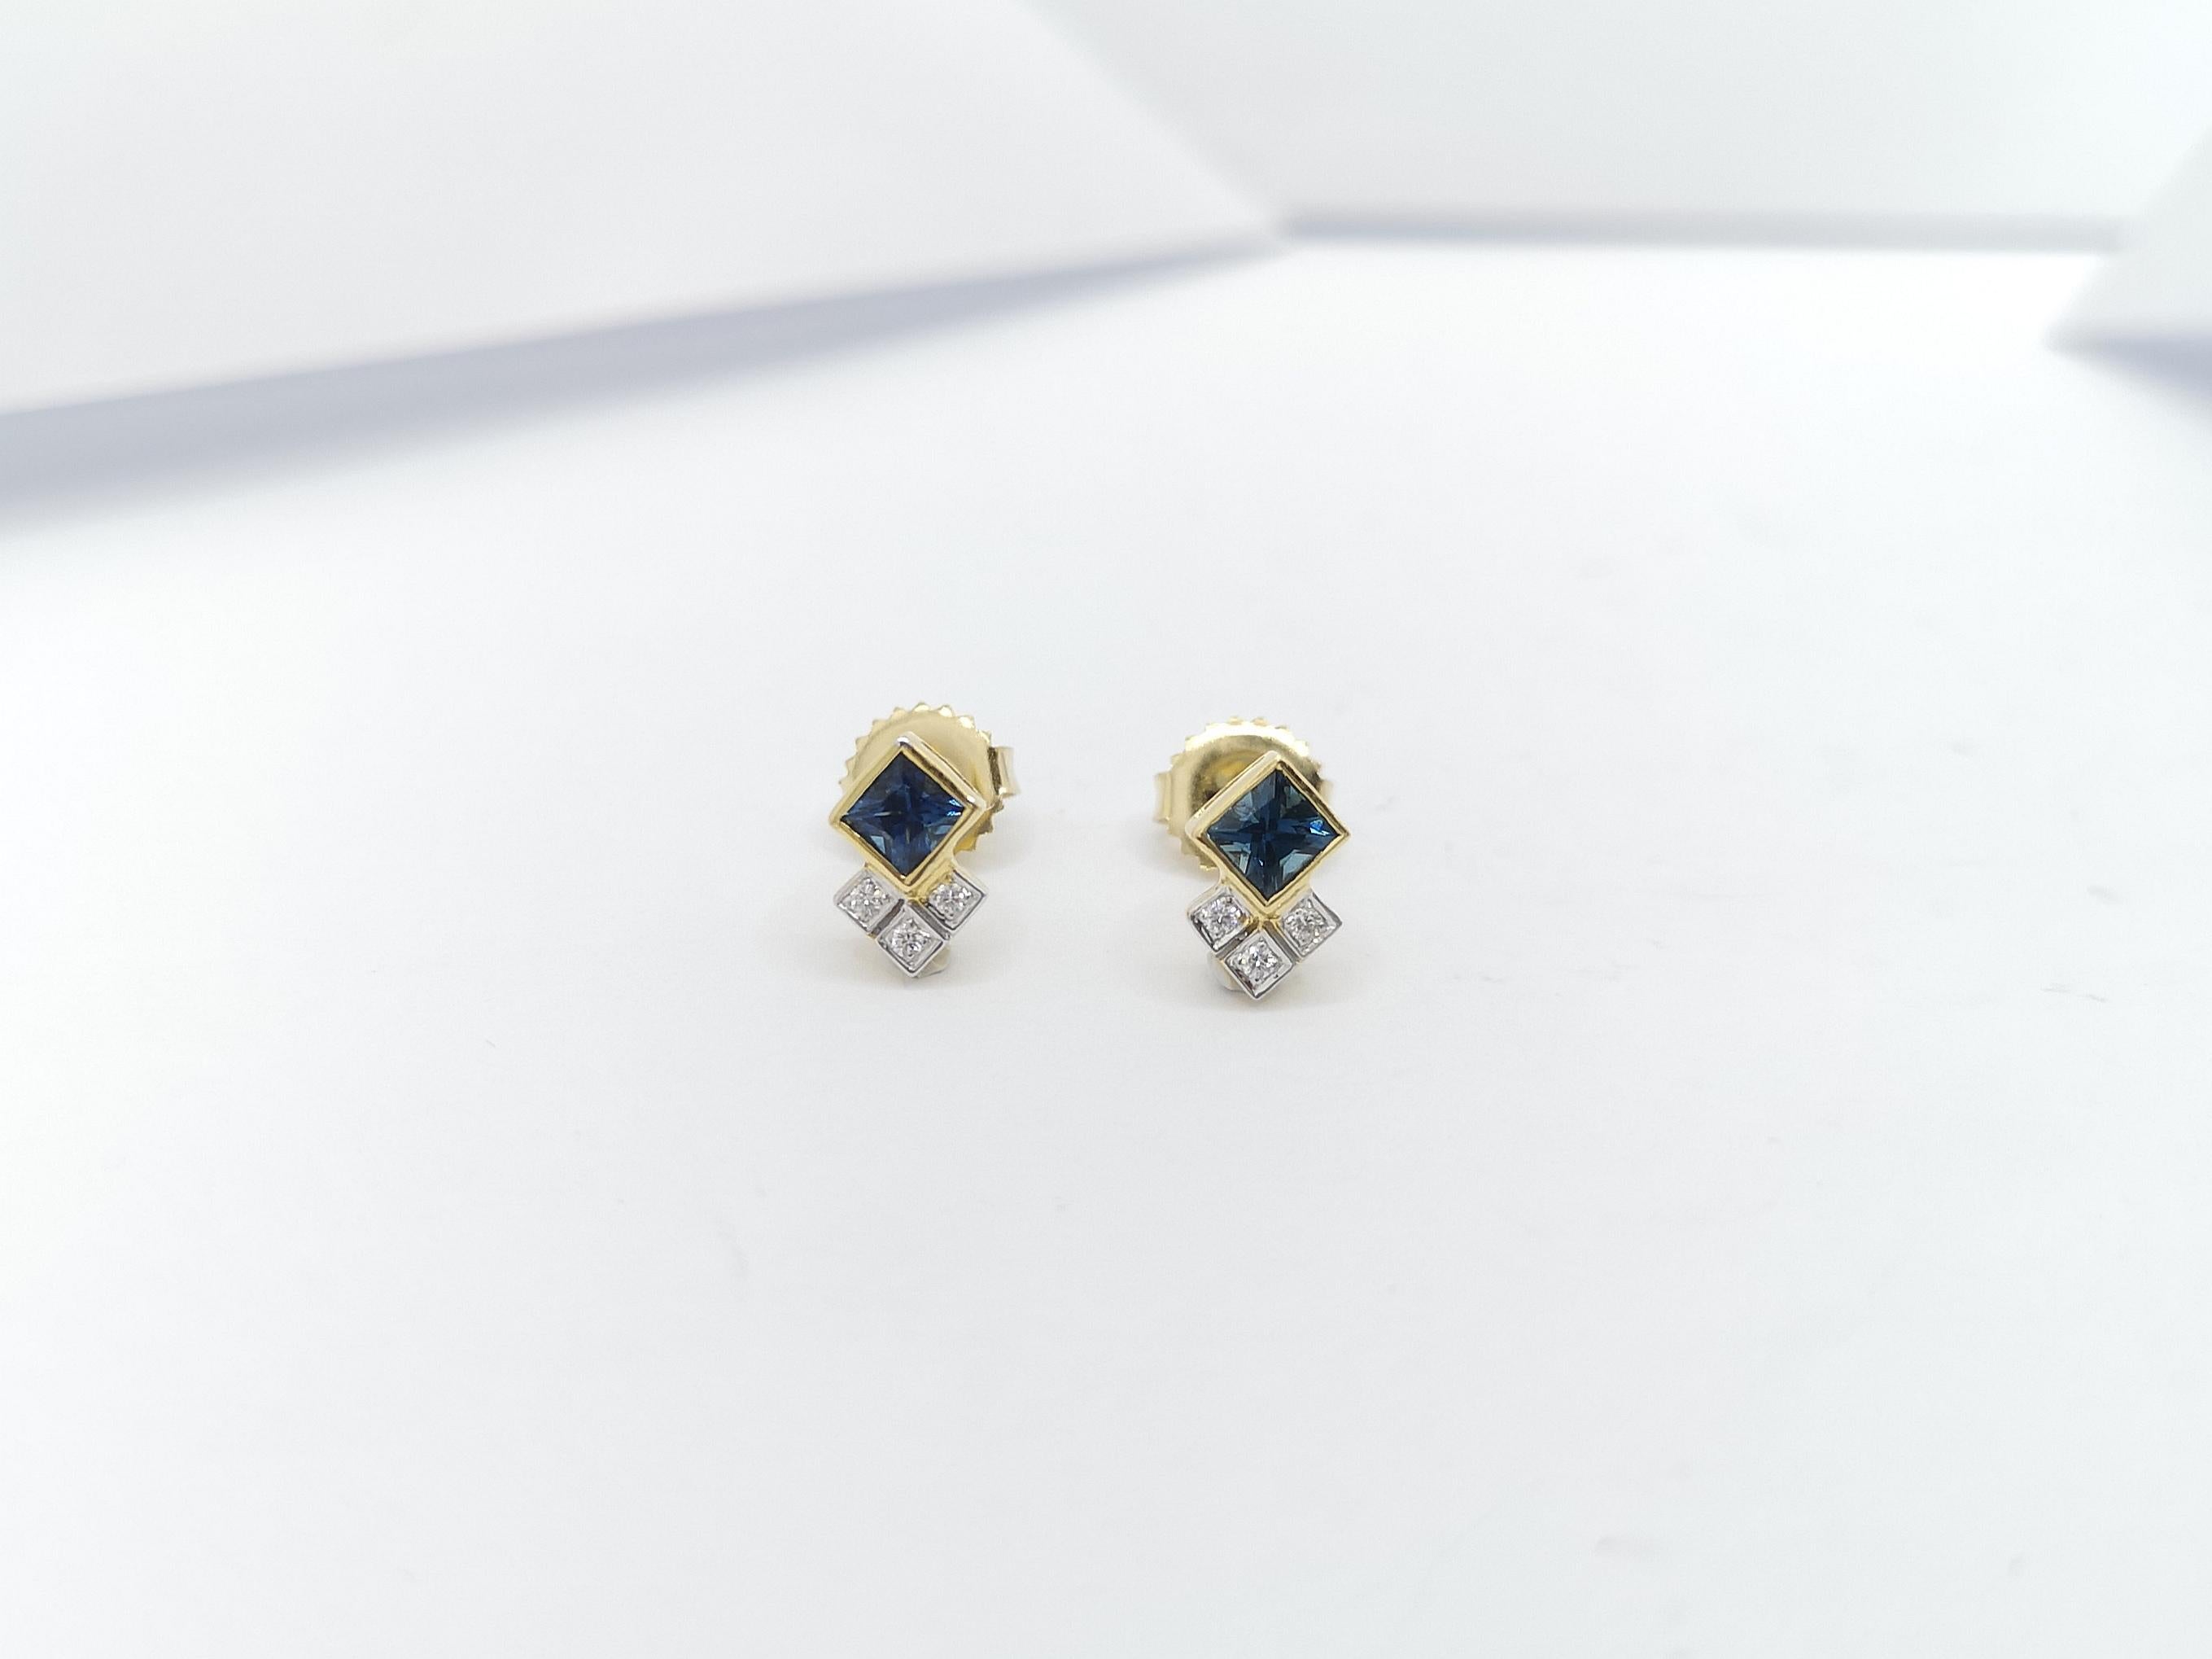 Square Cut Blue Sapphire 0.58 Carat with Diamond 0.05 Carat Earrings Set in 18 Karat Gold S For Sale